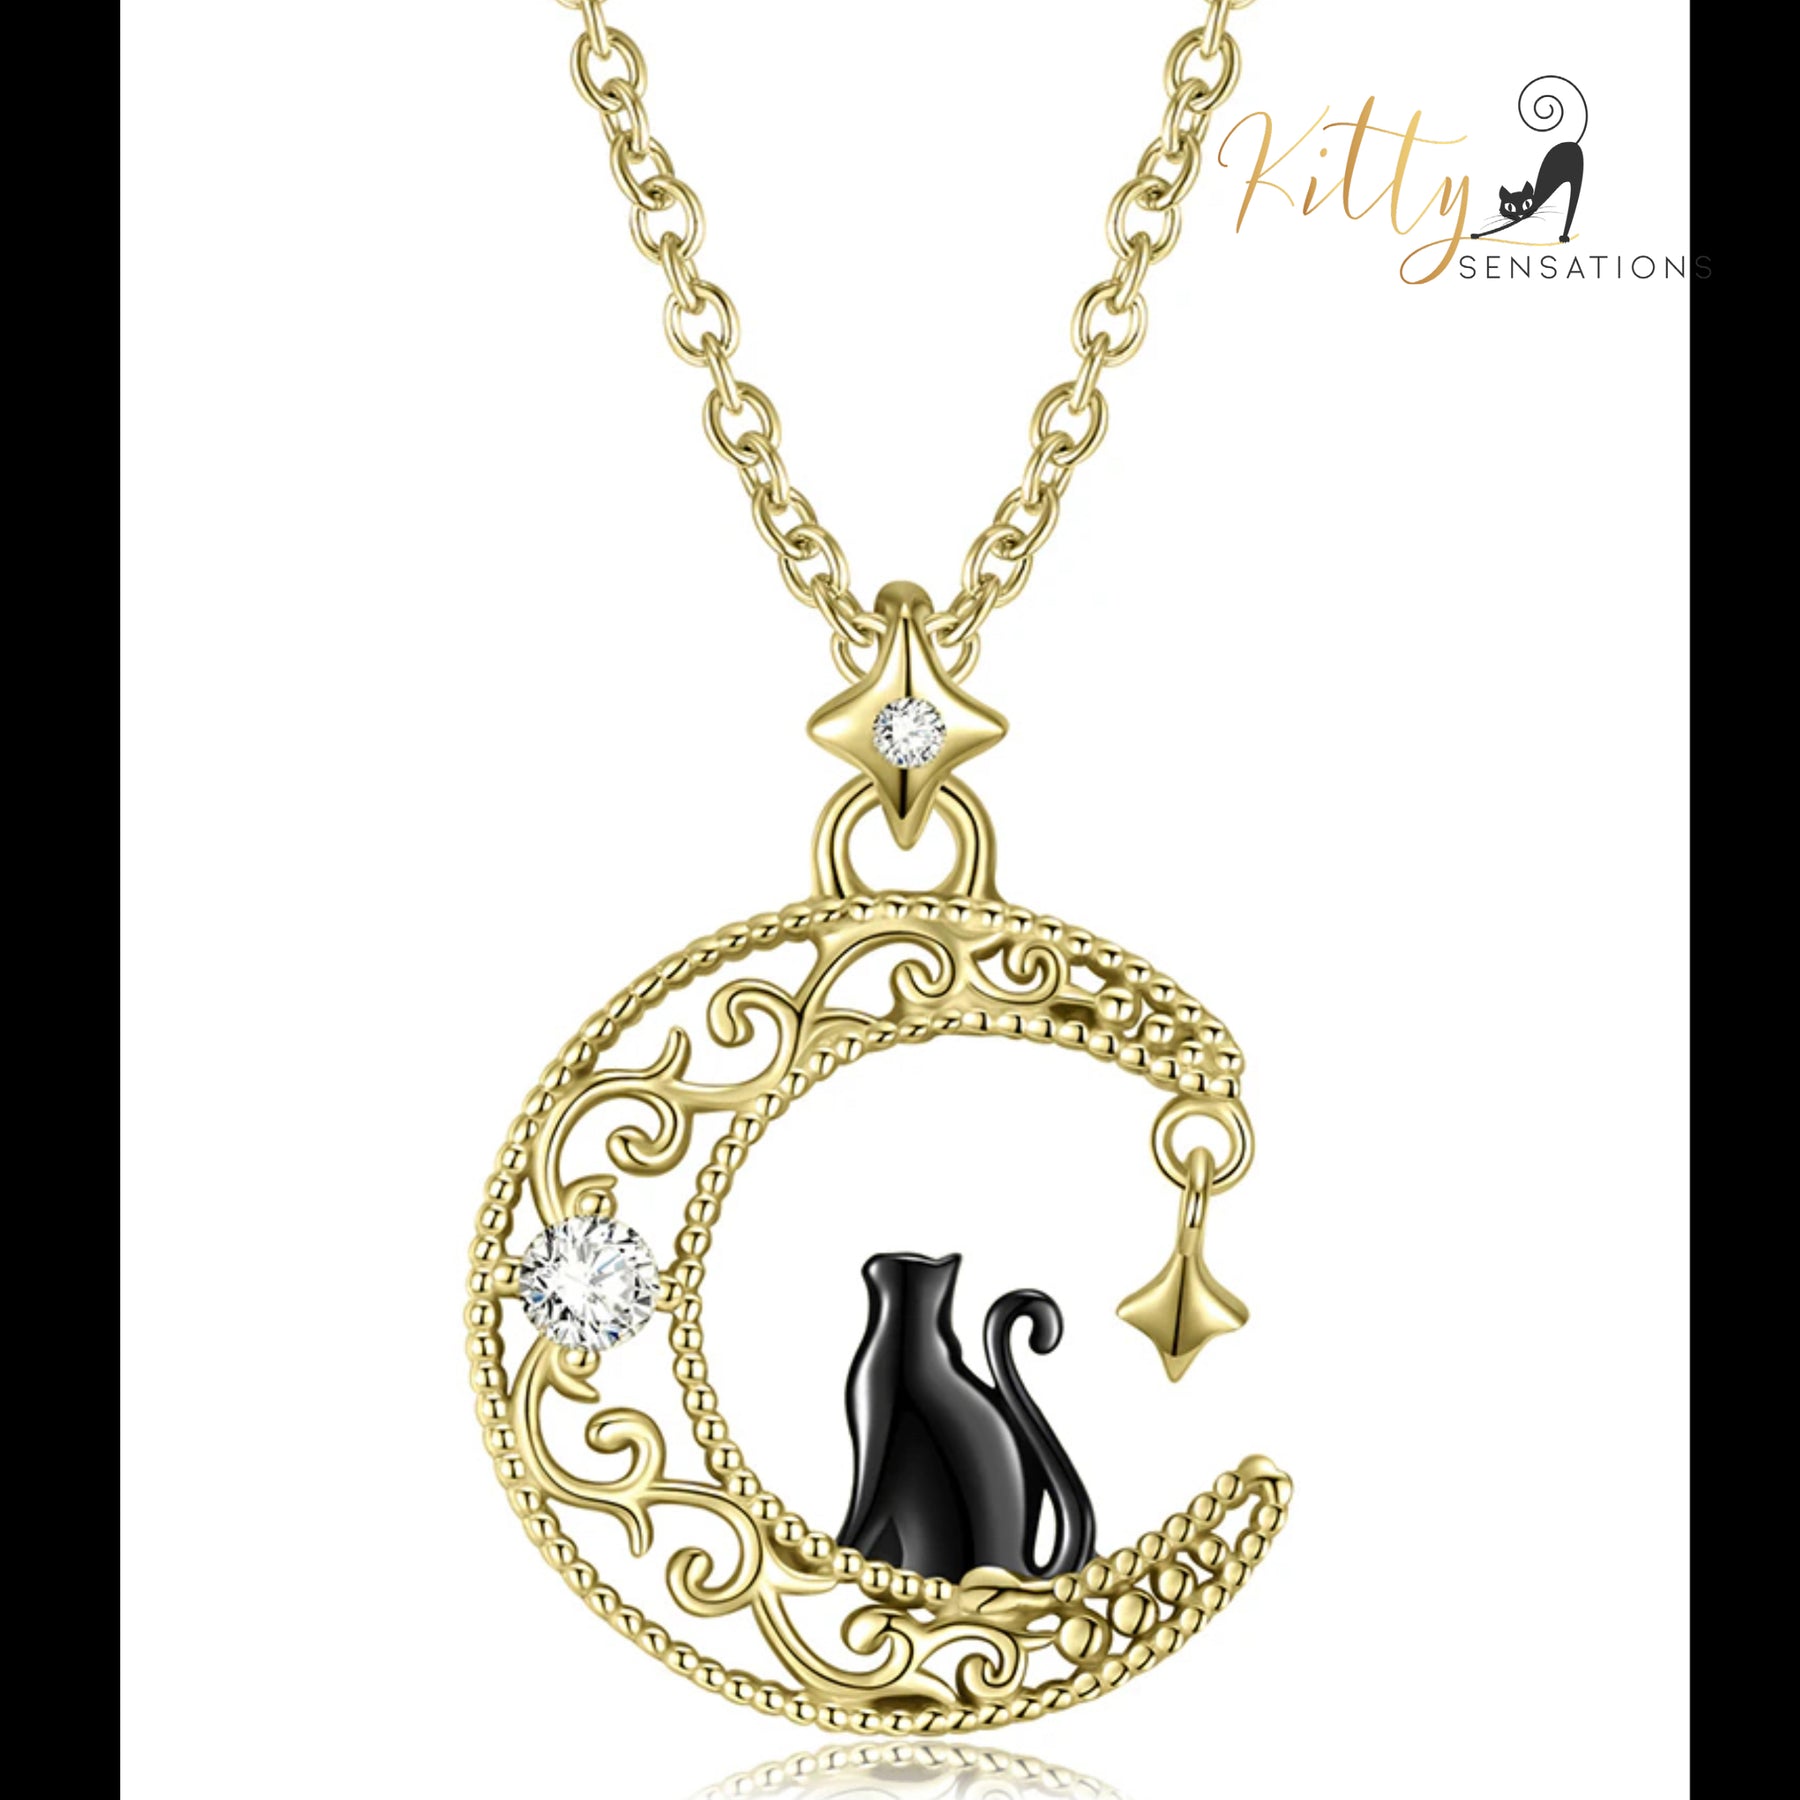 www.KittySensations.com: Black & Gold Moon Kitty Necklace in Solid 925 Sterling Silver ($89.15): https://www.kittysensations.com/products/black-gold-moon-kitty-necklace-in-solid-925-sterling-silver